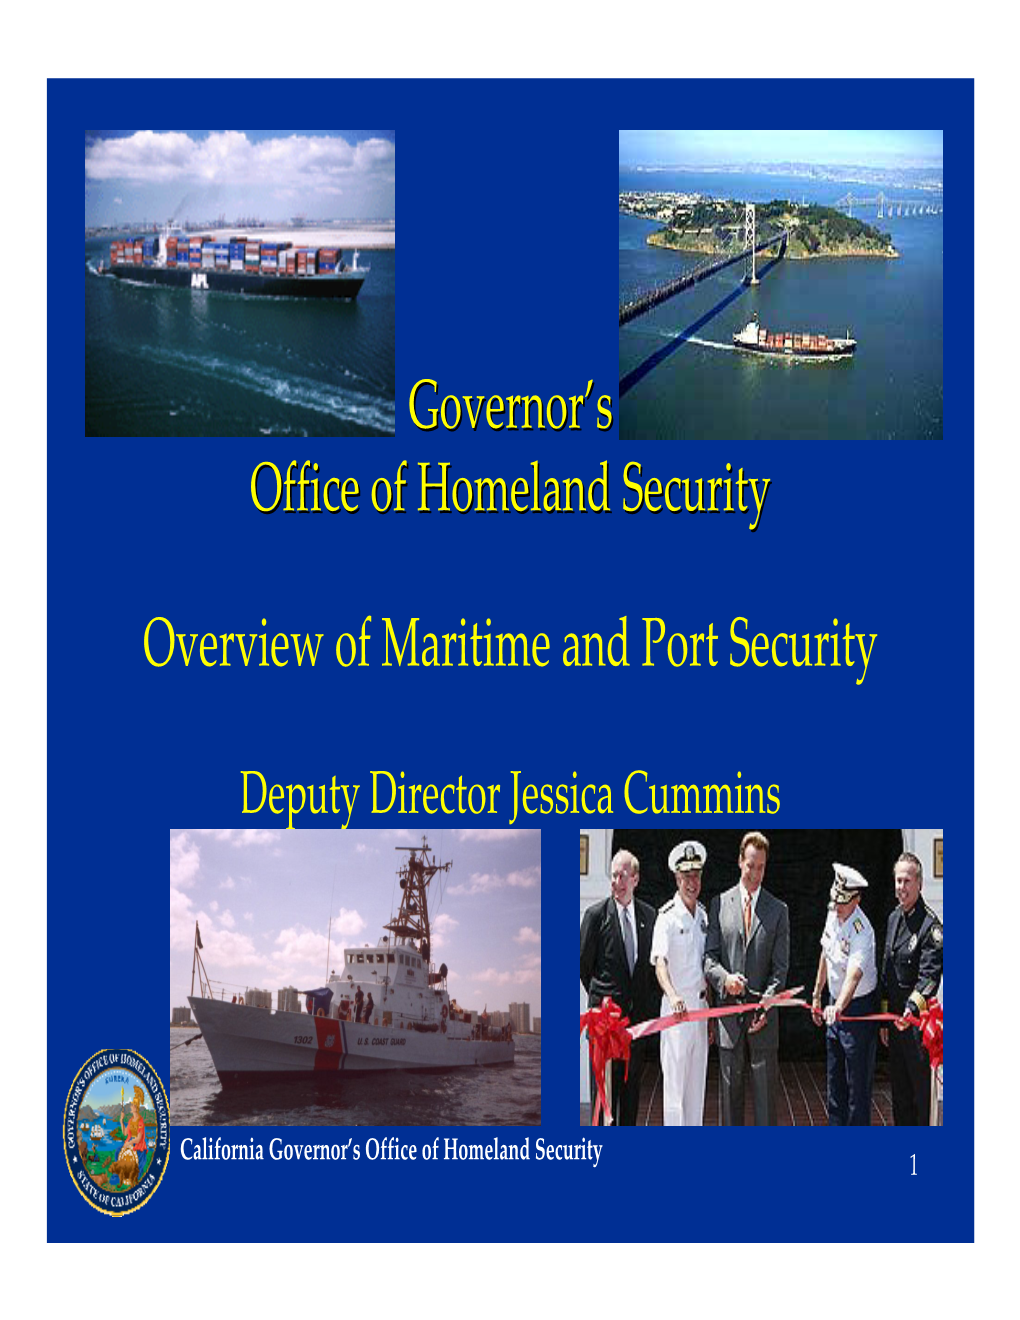 Governor's Office of Homeland Security Overview of Maritime and Port Security